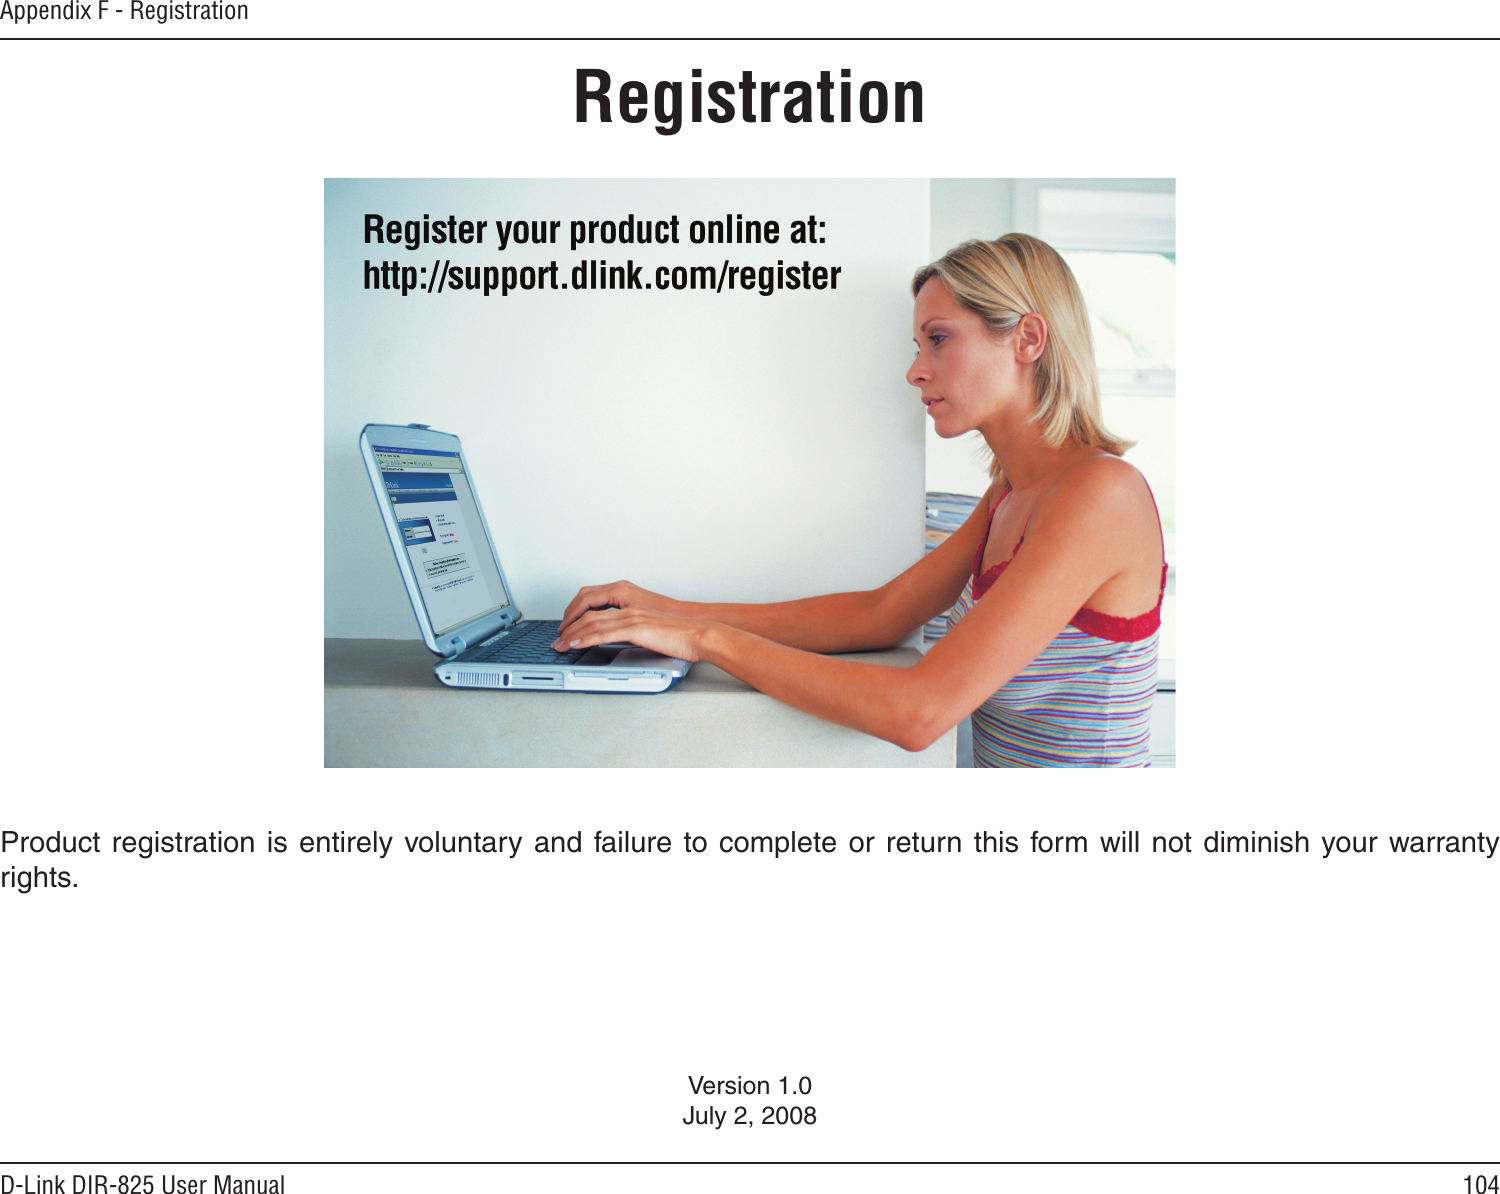 104D-Link DIR-825 User ManualAppendix F - RegistrationVersion 1.0July 2, 2008Product registration is entirely voluntary  and  failure to complete or return this form will not diminish your warranty rights.Registration